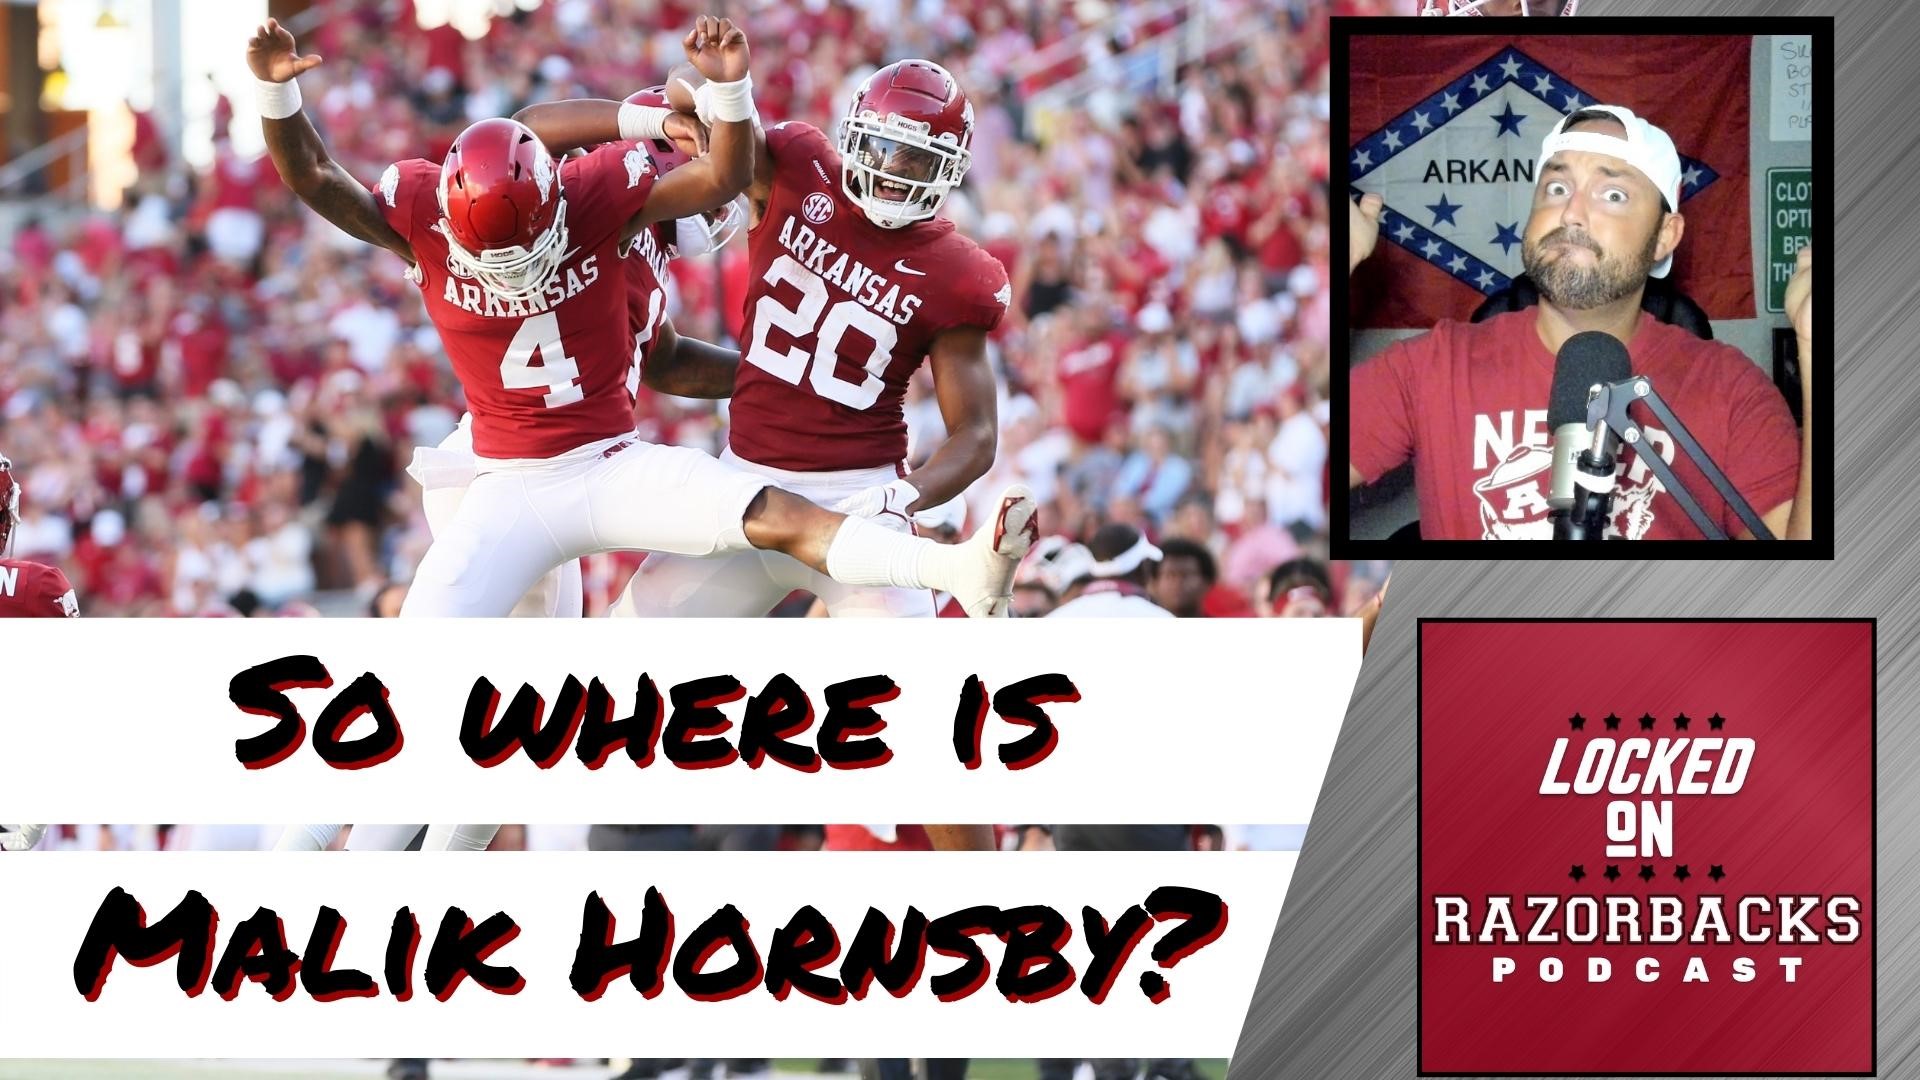 John Nabors discusses the biggest question on all of Razorback fans mind on the whereabouts of Malik Hornsby.